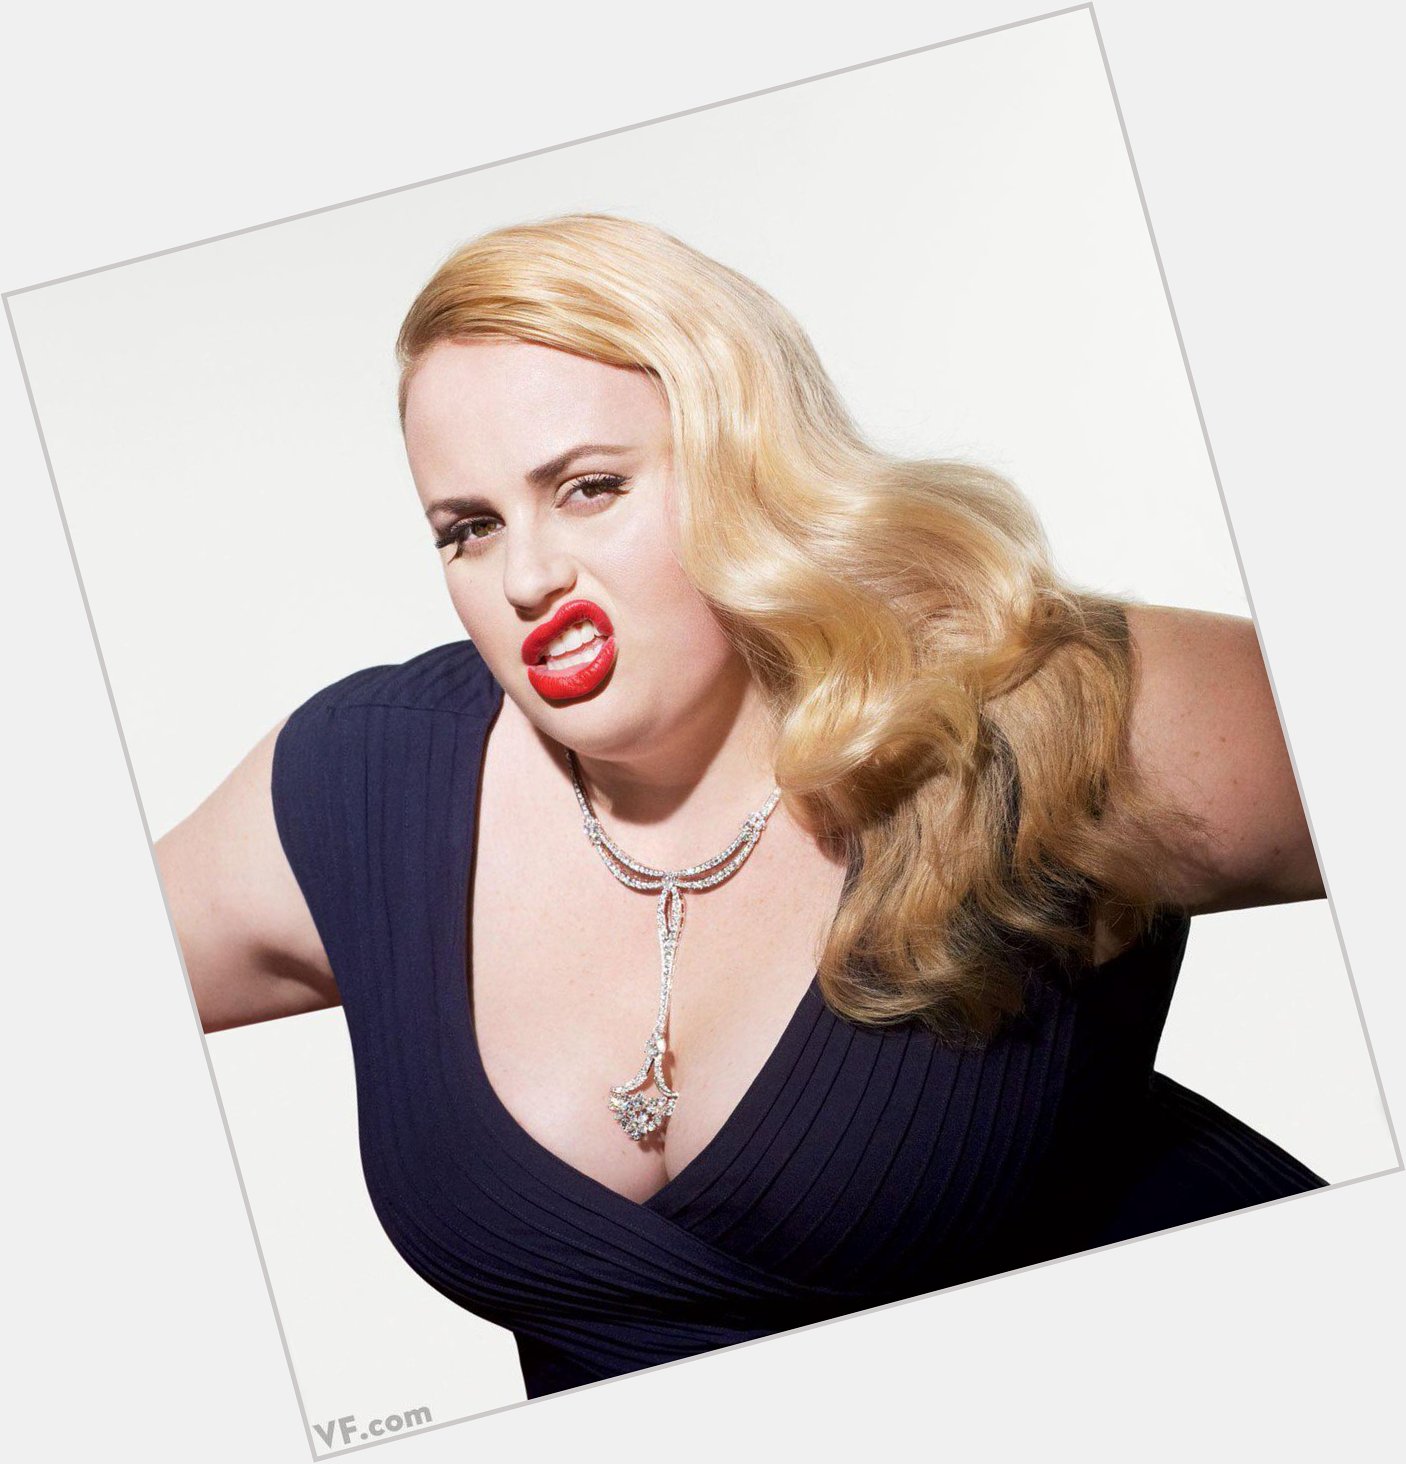 Happy Birthday to Rebel Wilson, who is 29 today!  